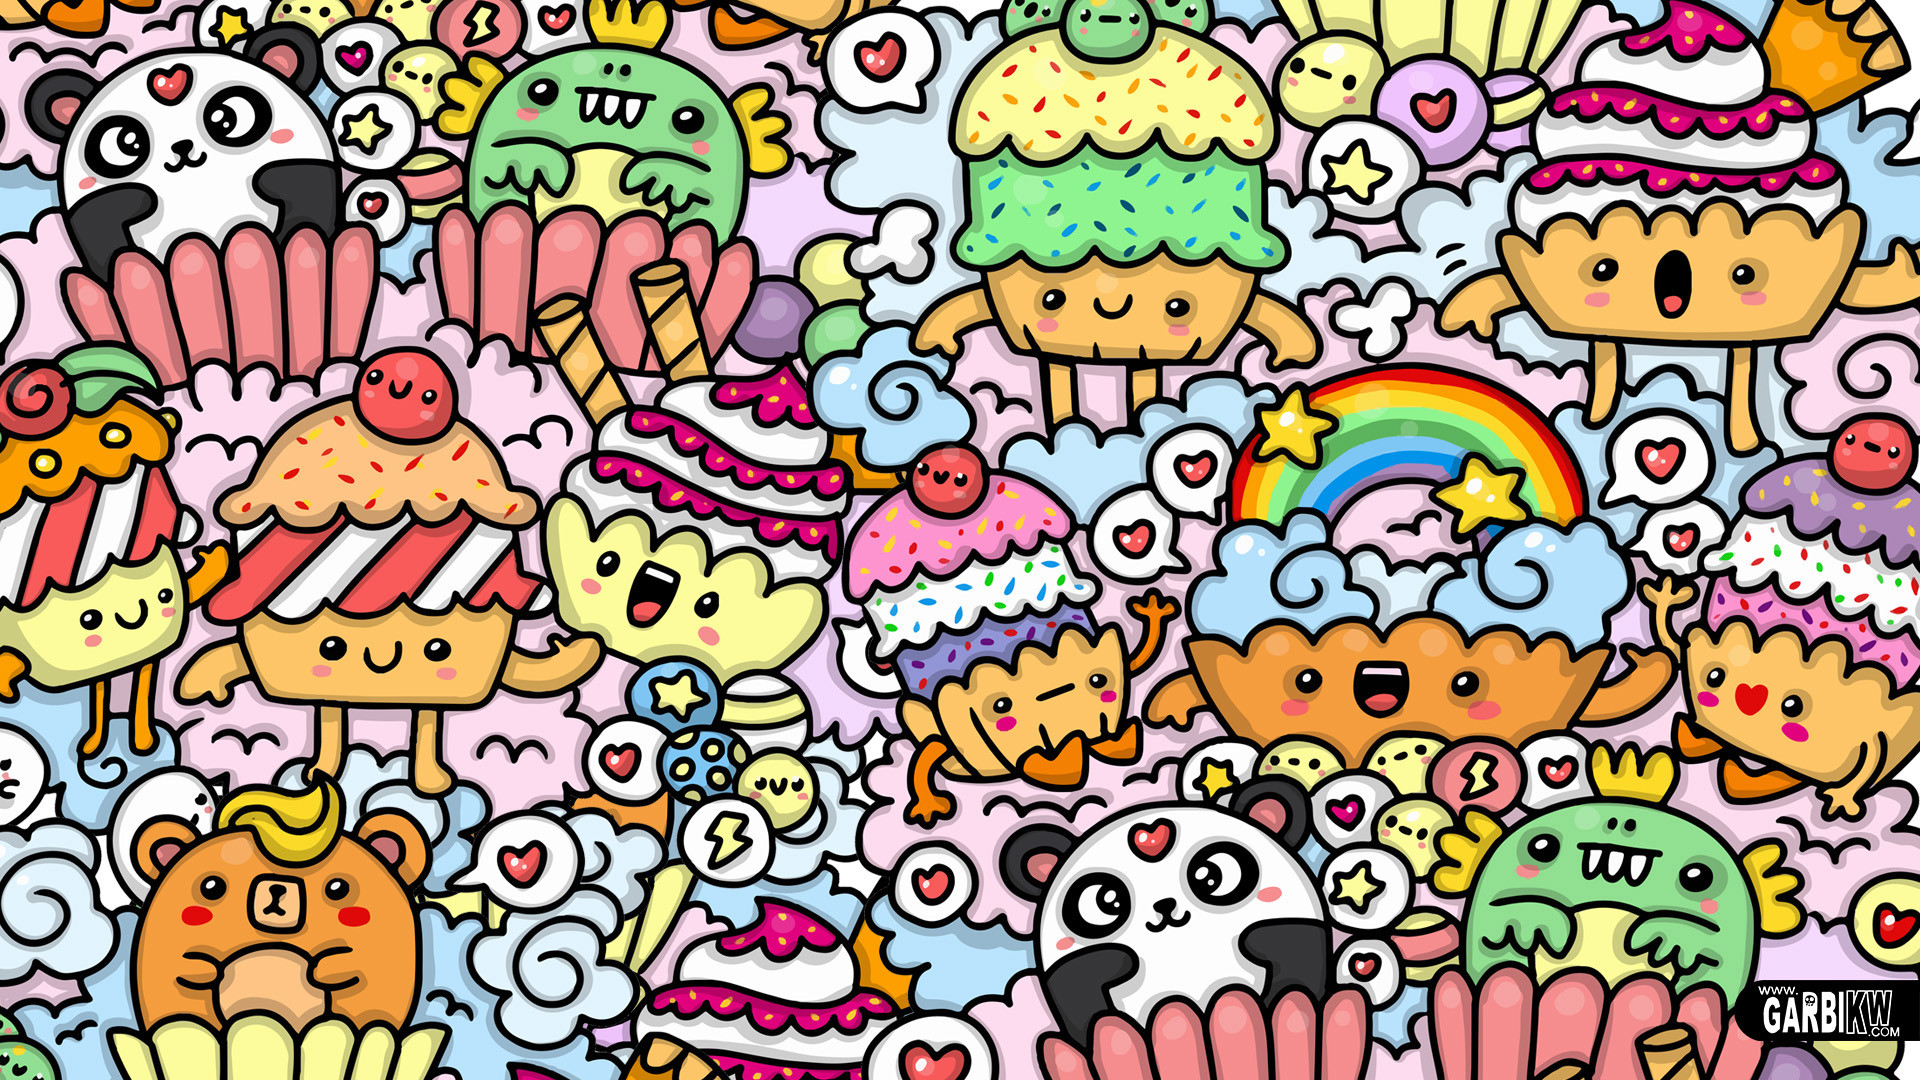 Doodle Art Wallpapers 52 Images HD Wallpapers Download Free Images Wallpaper [wallpaper981.blogspot.com]